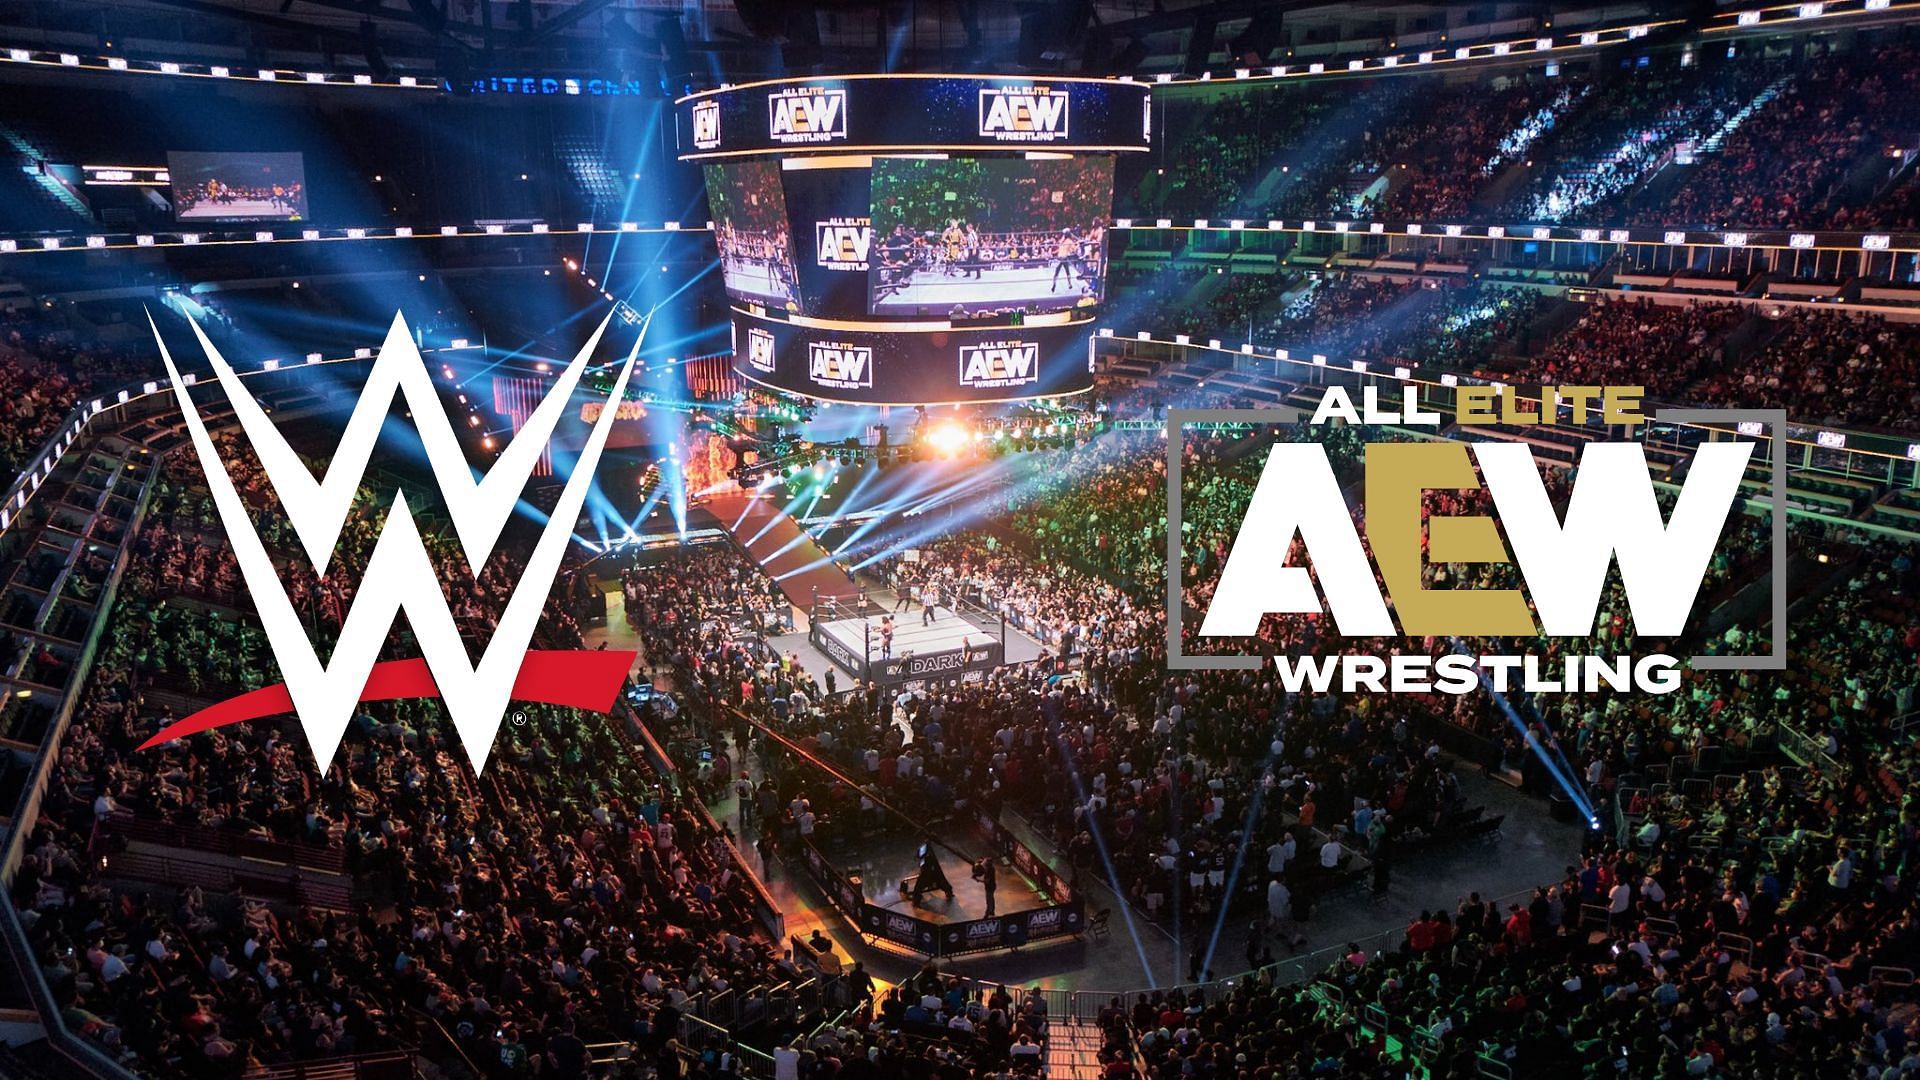 Which former WWE Superstar could be appearing on AEW Dynamite this week?